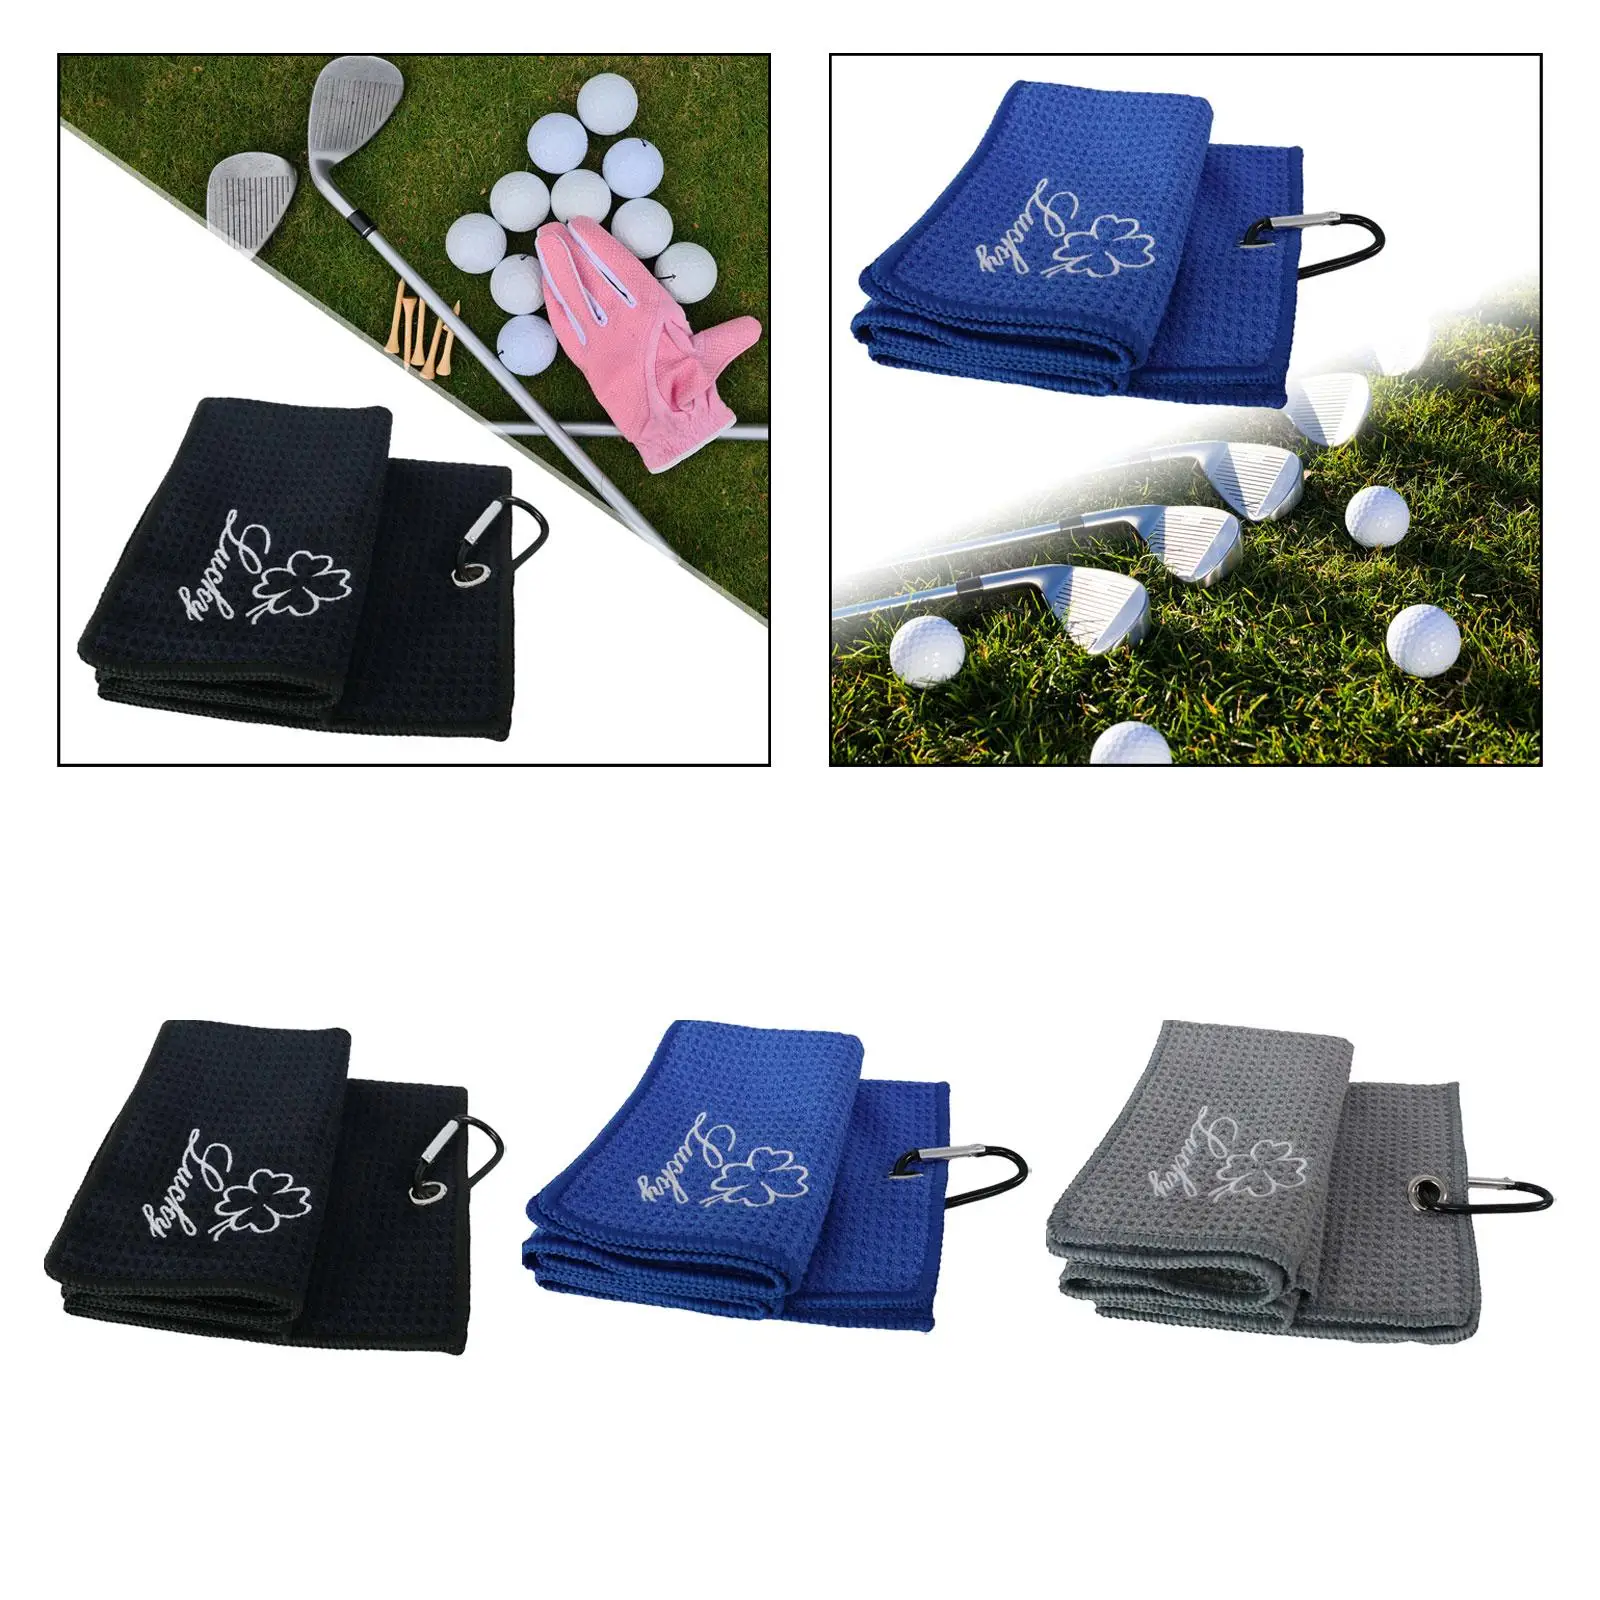 Golf Club Cleaning Towel Golf Towel for Golf Bags with Heavy Duty Carabiner for Equipment Irons Golf Tees Women Men Balls 